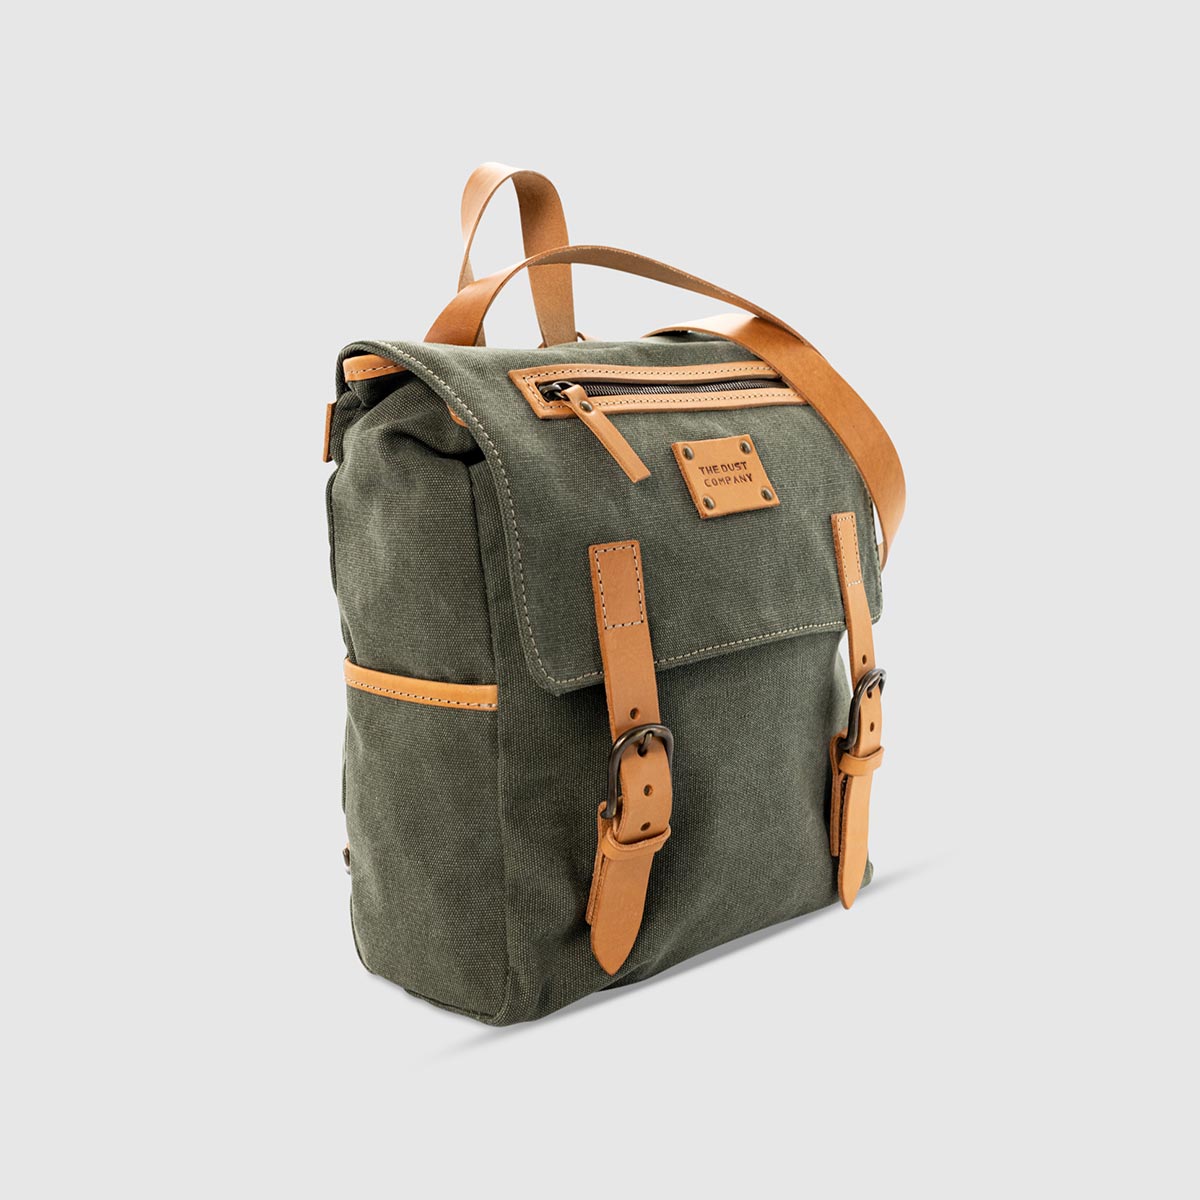 Cotton Explorer Backpack -Green The Dust on sale 2022 2